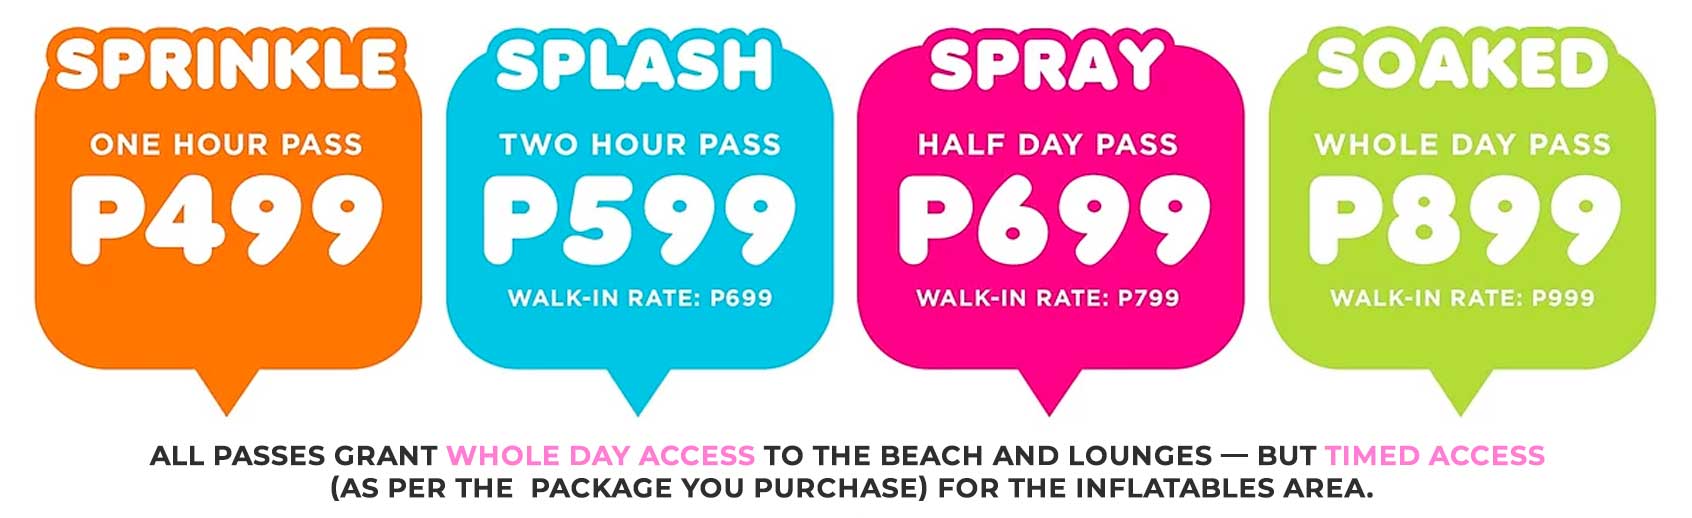 Inflatable Island: Ticket Price Packages (Passes)